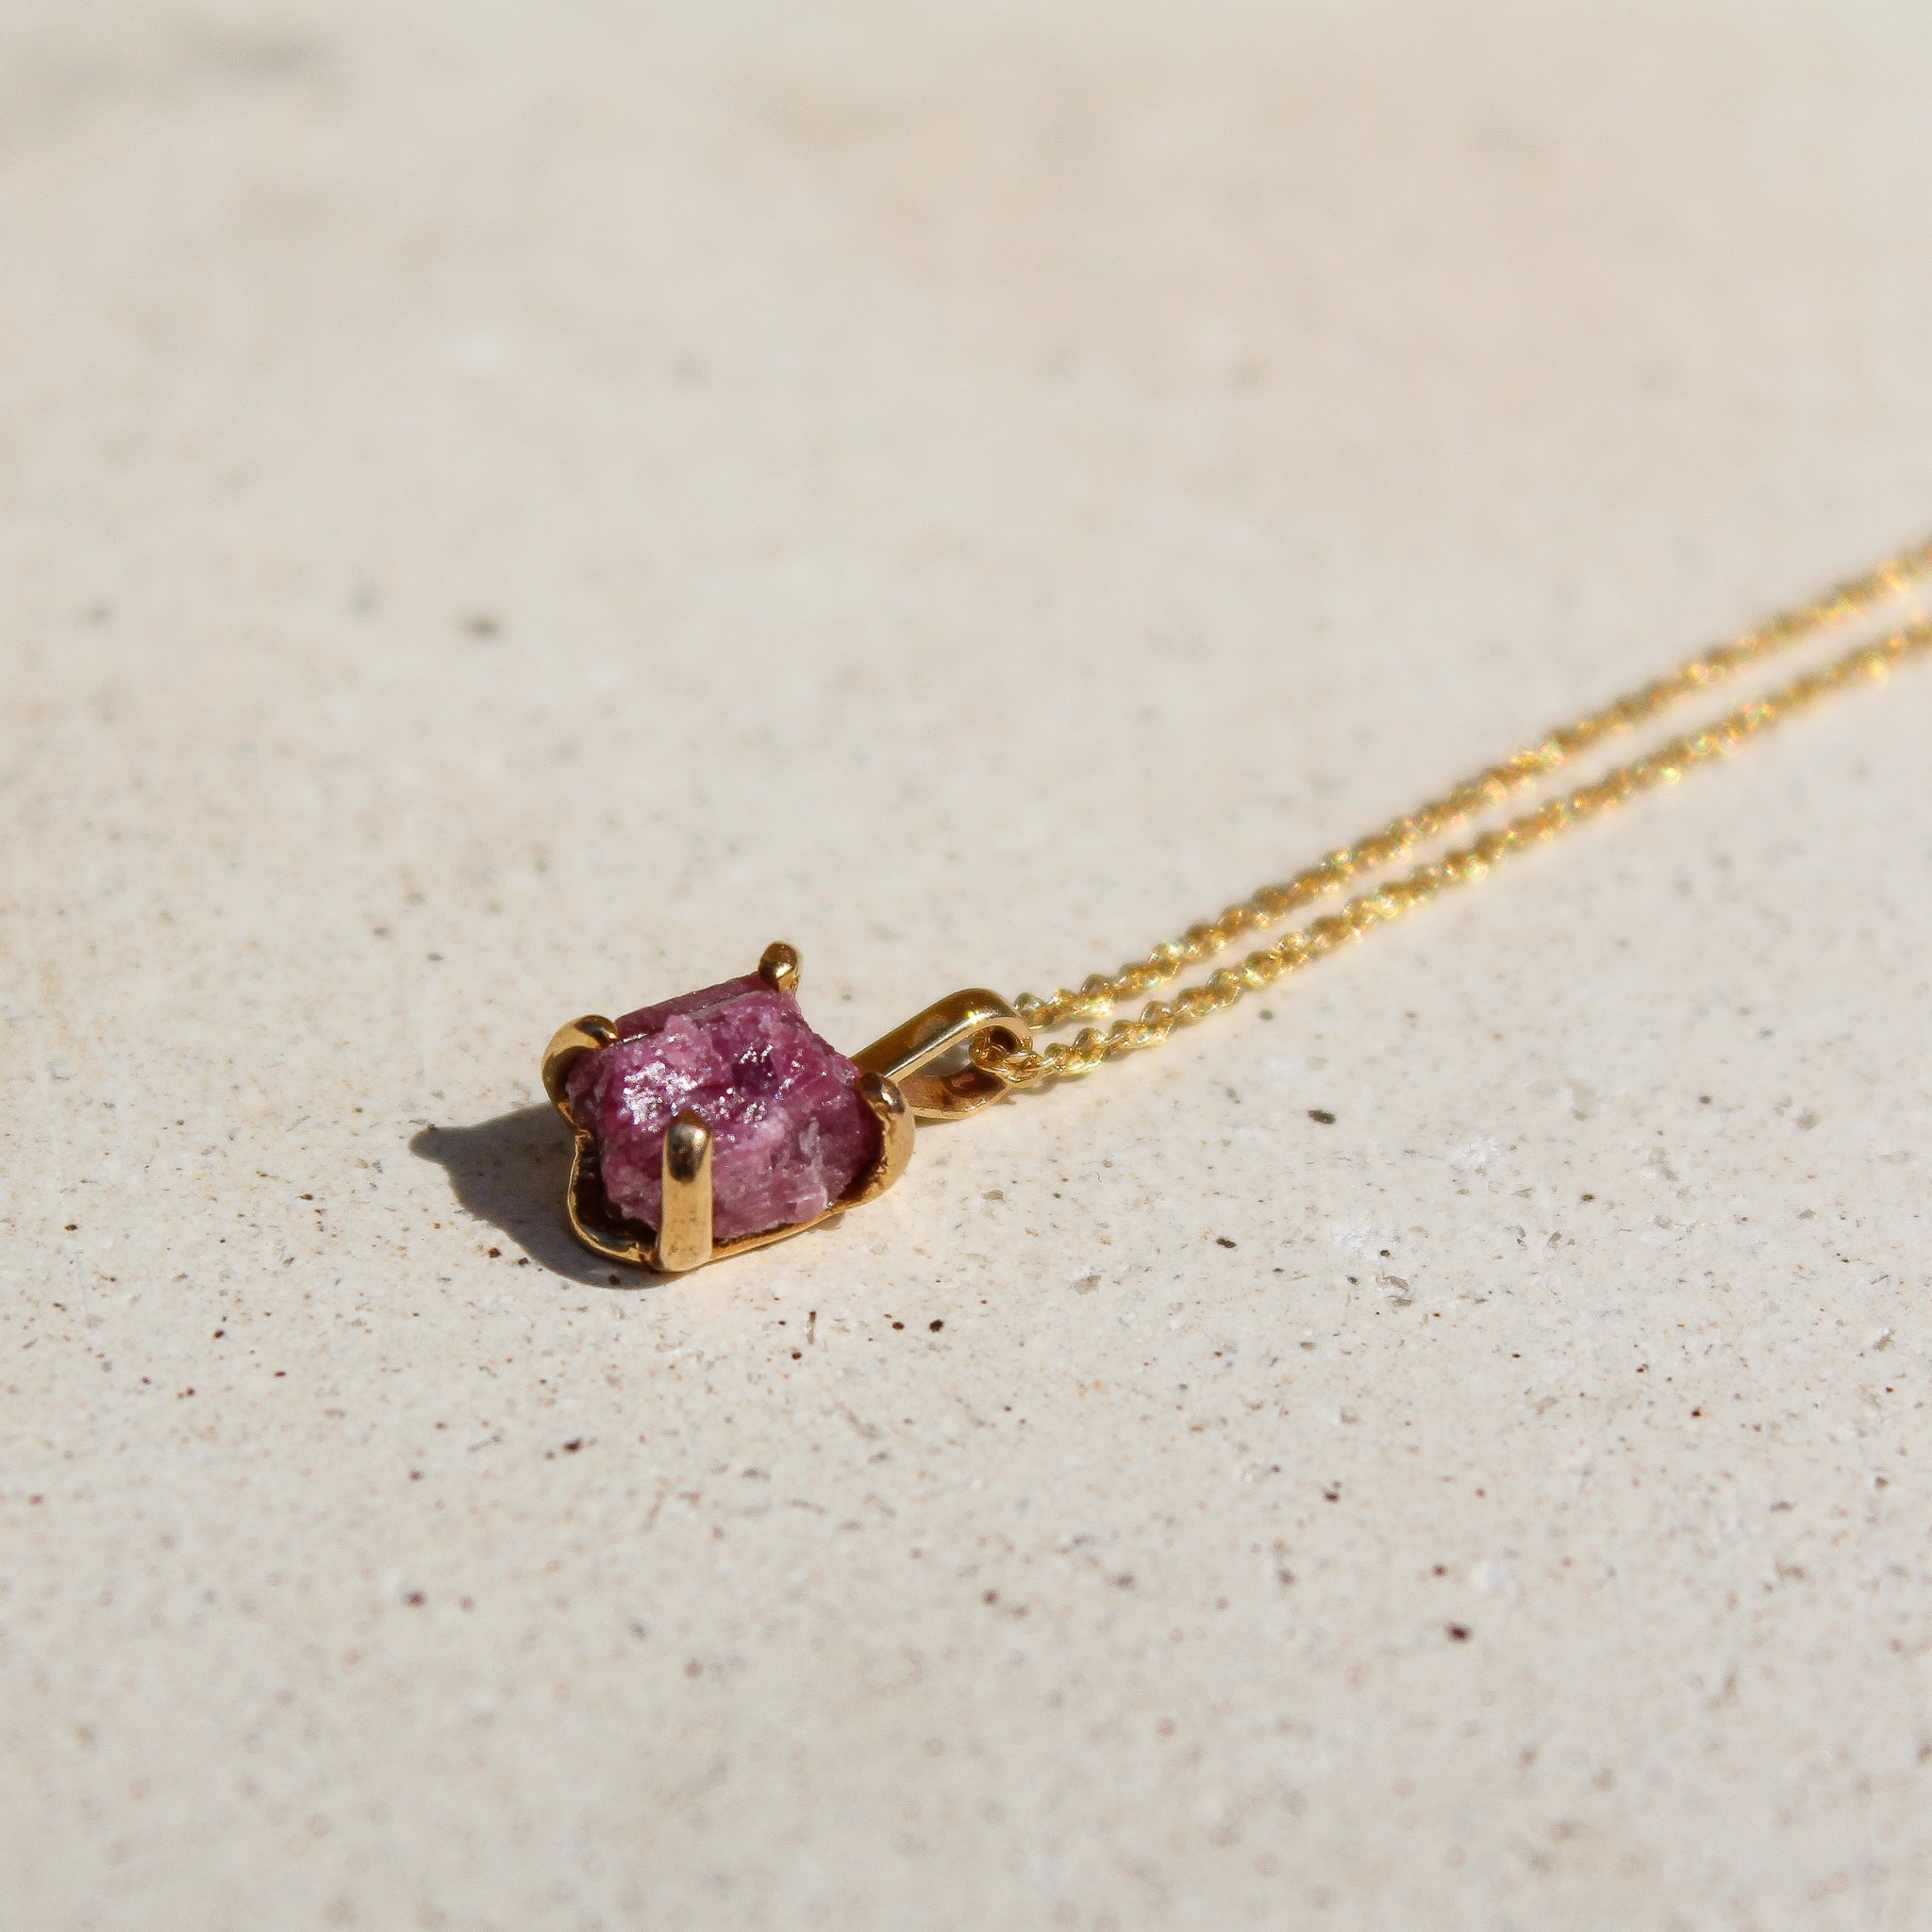 LITTLE CHARM NECKLACE - PINK TOURMALINE (Gold plated)